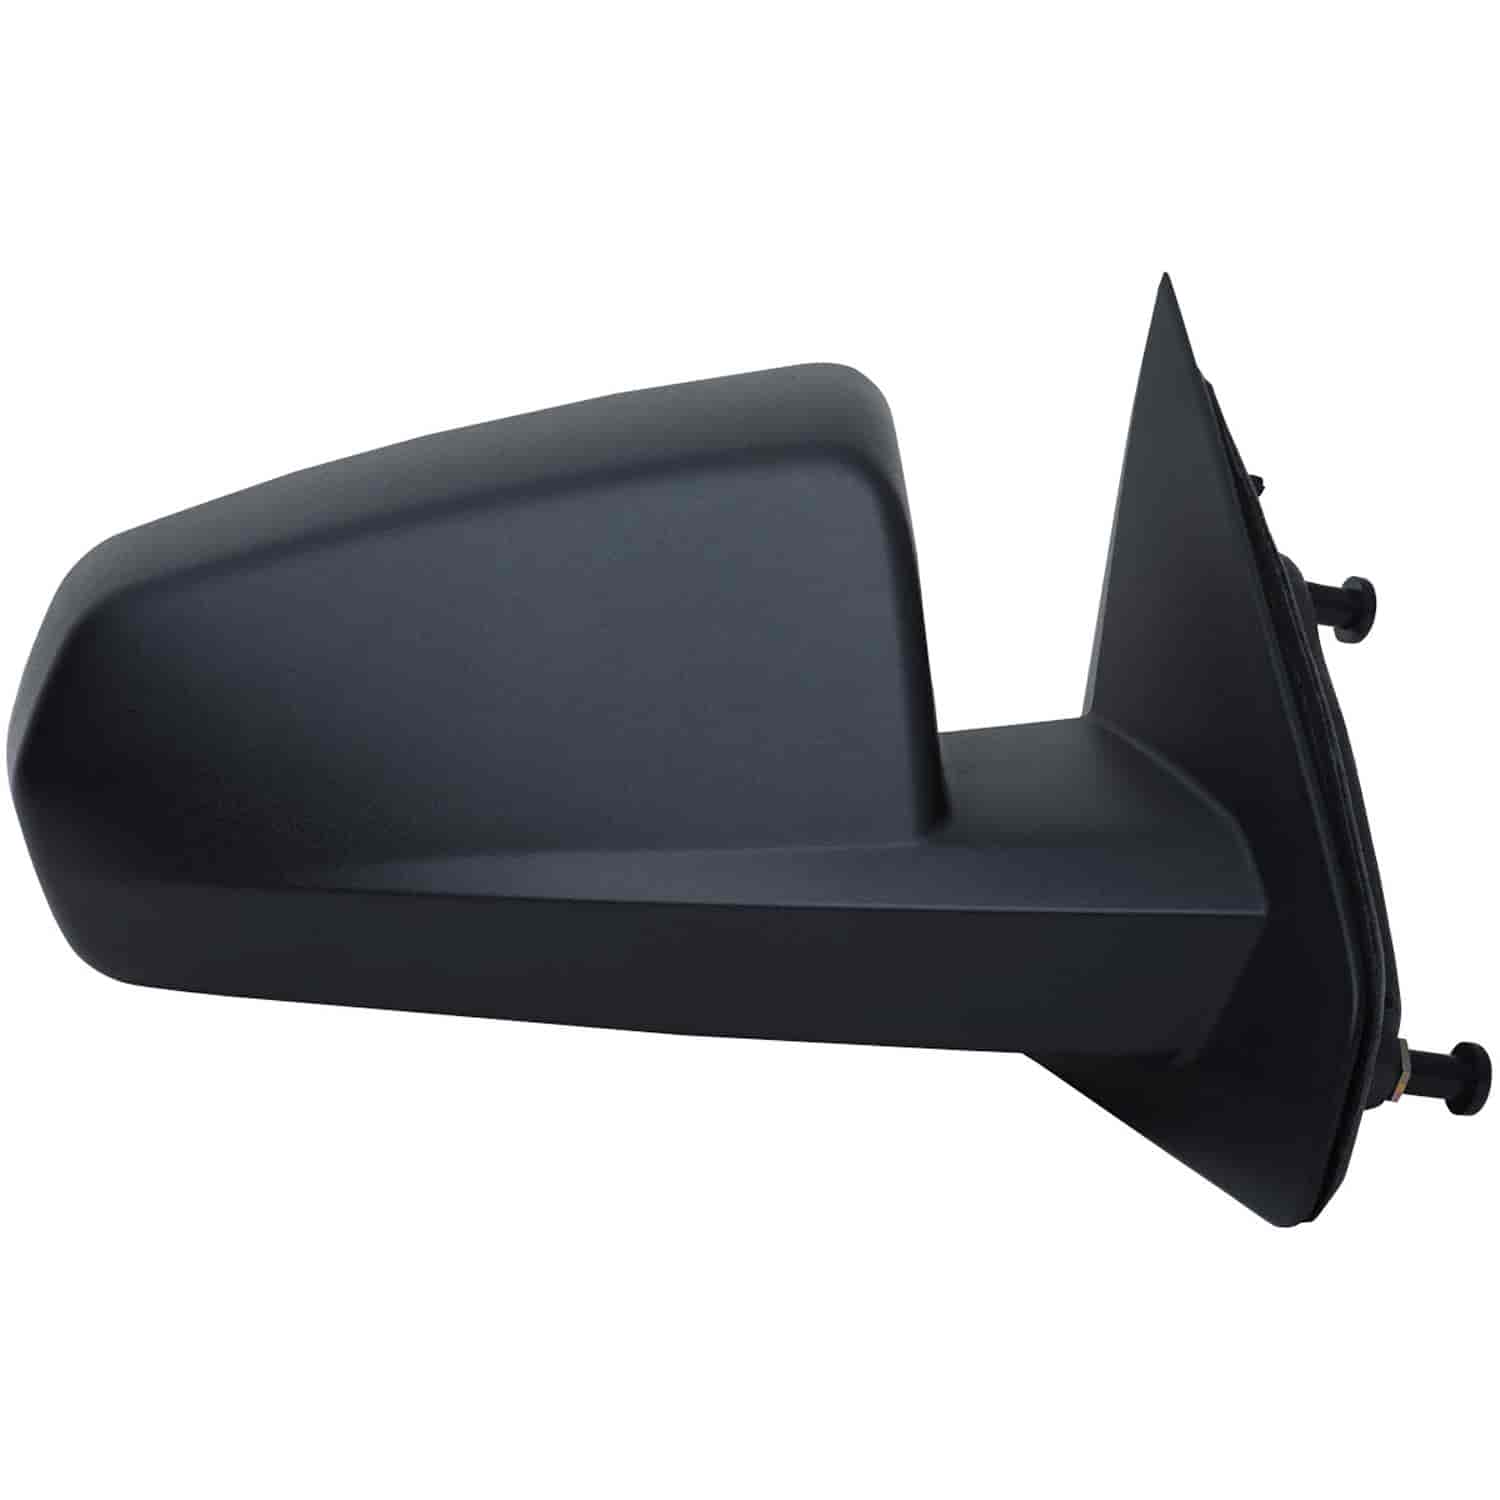 OEM Style Replacement mirror for 08-14 Dodge Avenger passenger side mirror tested to fit and functio